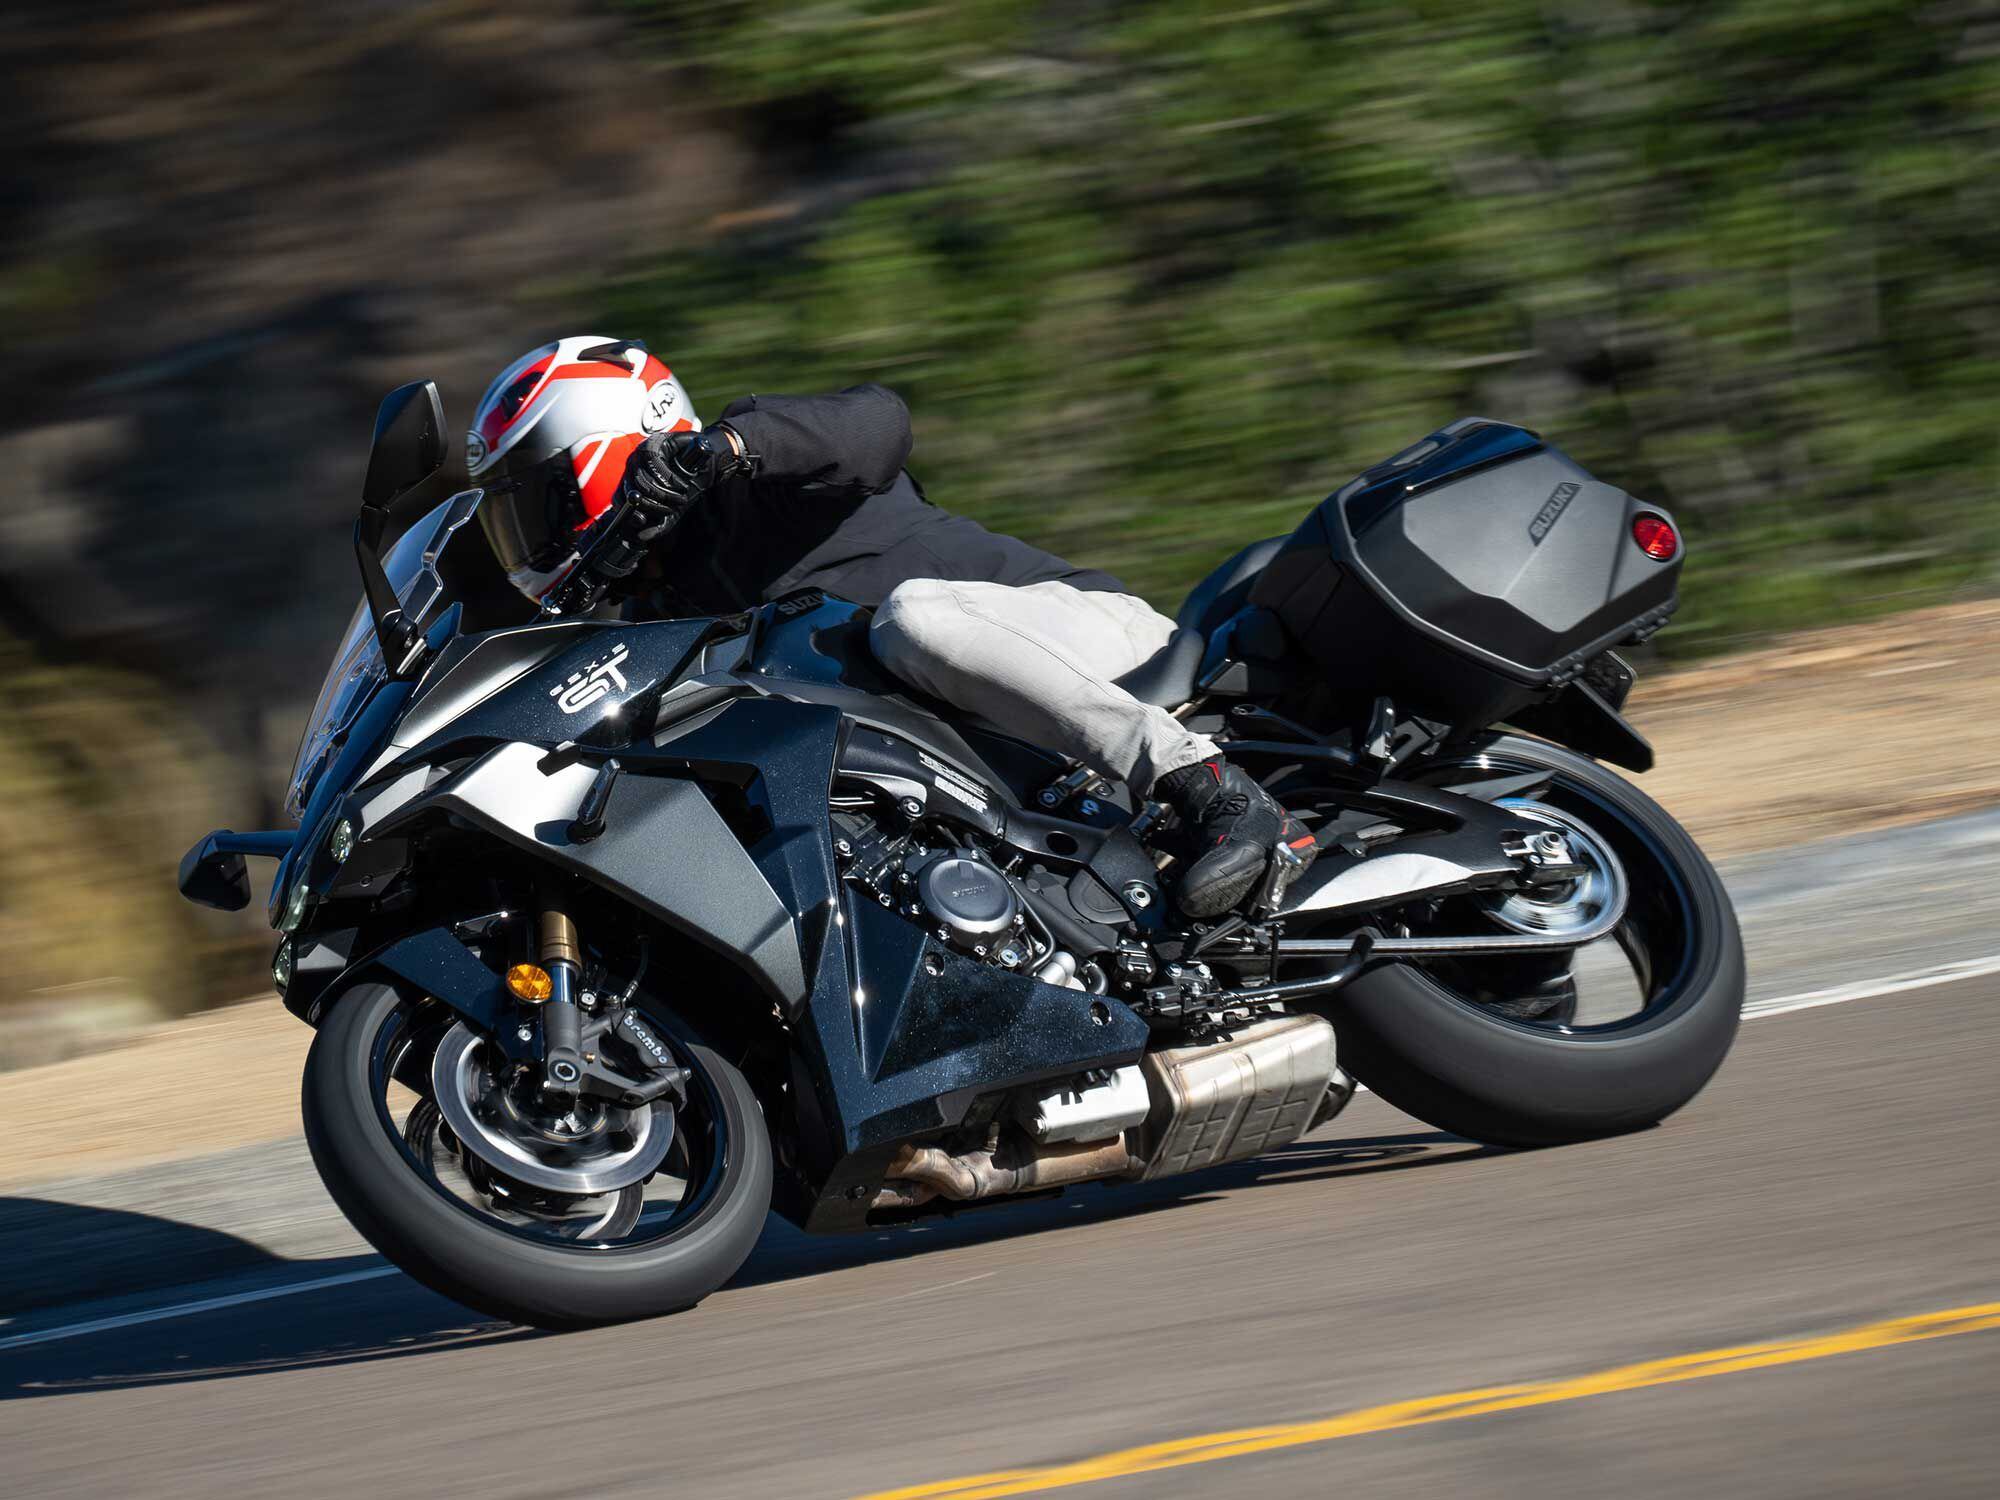 Suzuki pairs classic sport-touring performance and value with its GSX-S1000GT+ sport-touring bike.